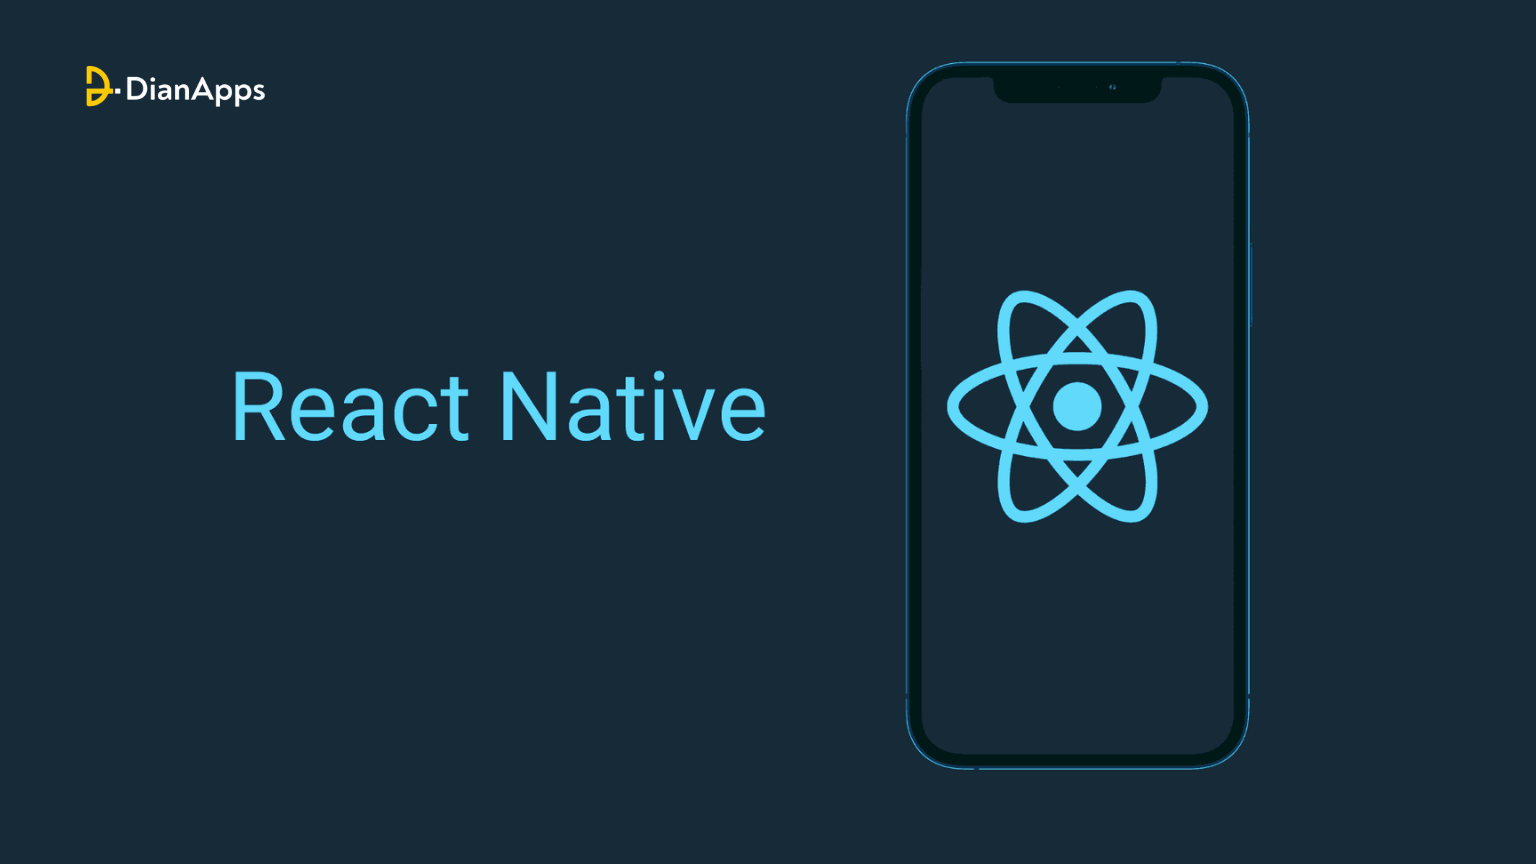 Remove Unused Dependencies From a React Native Project